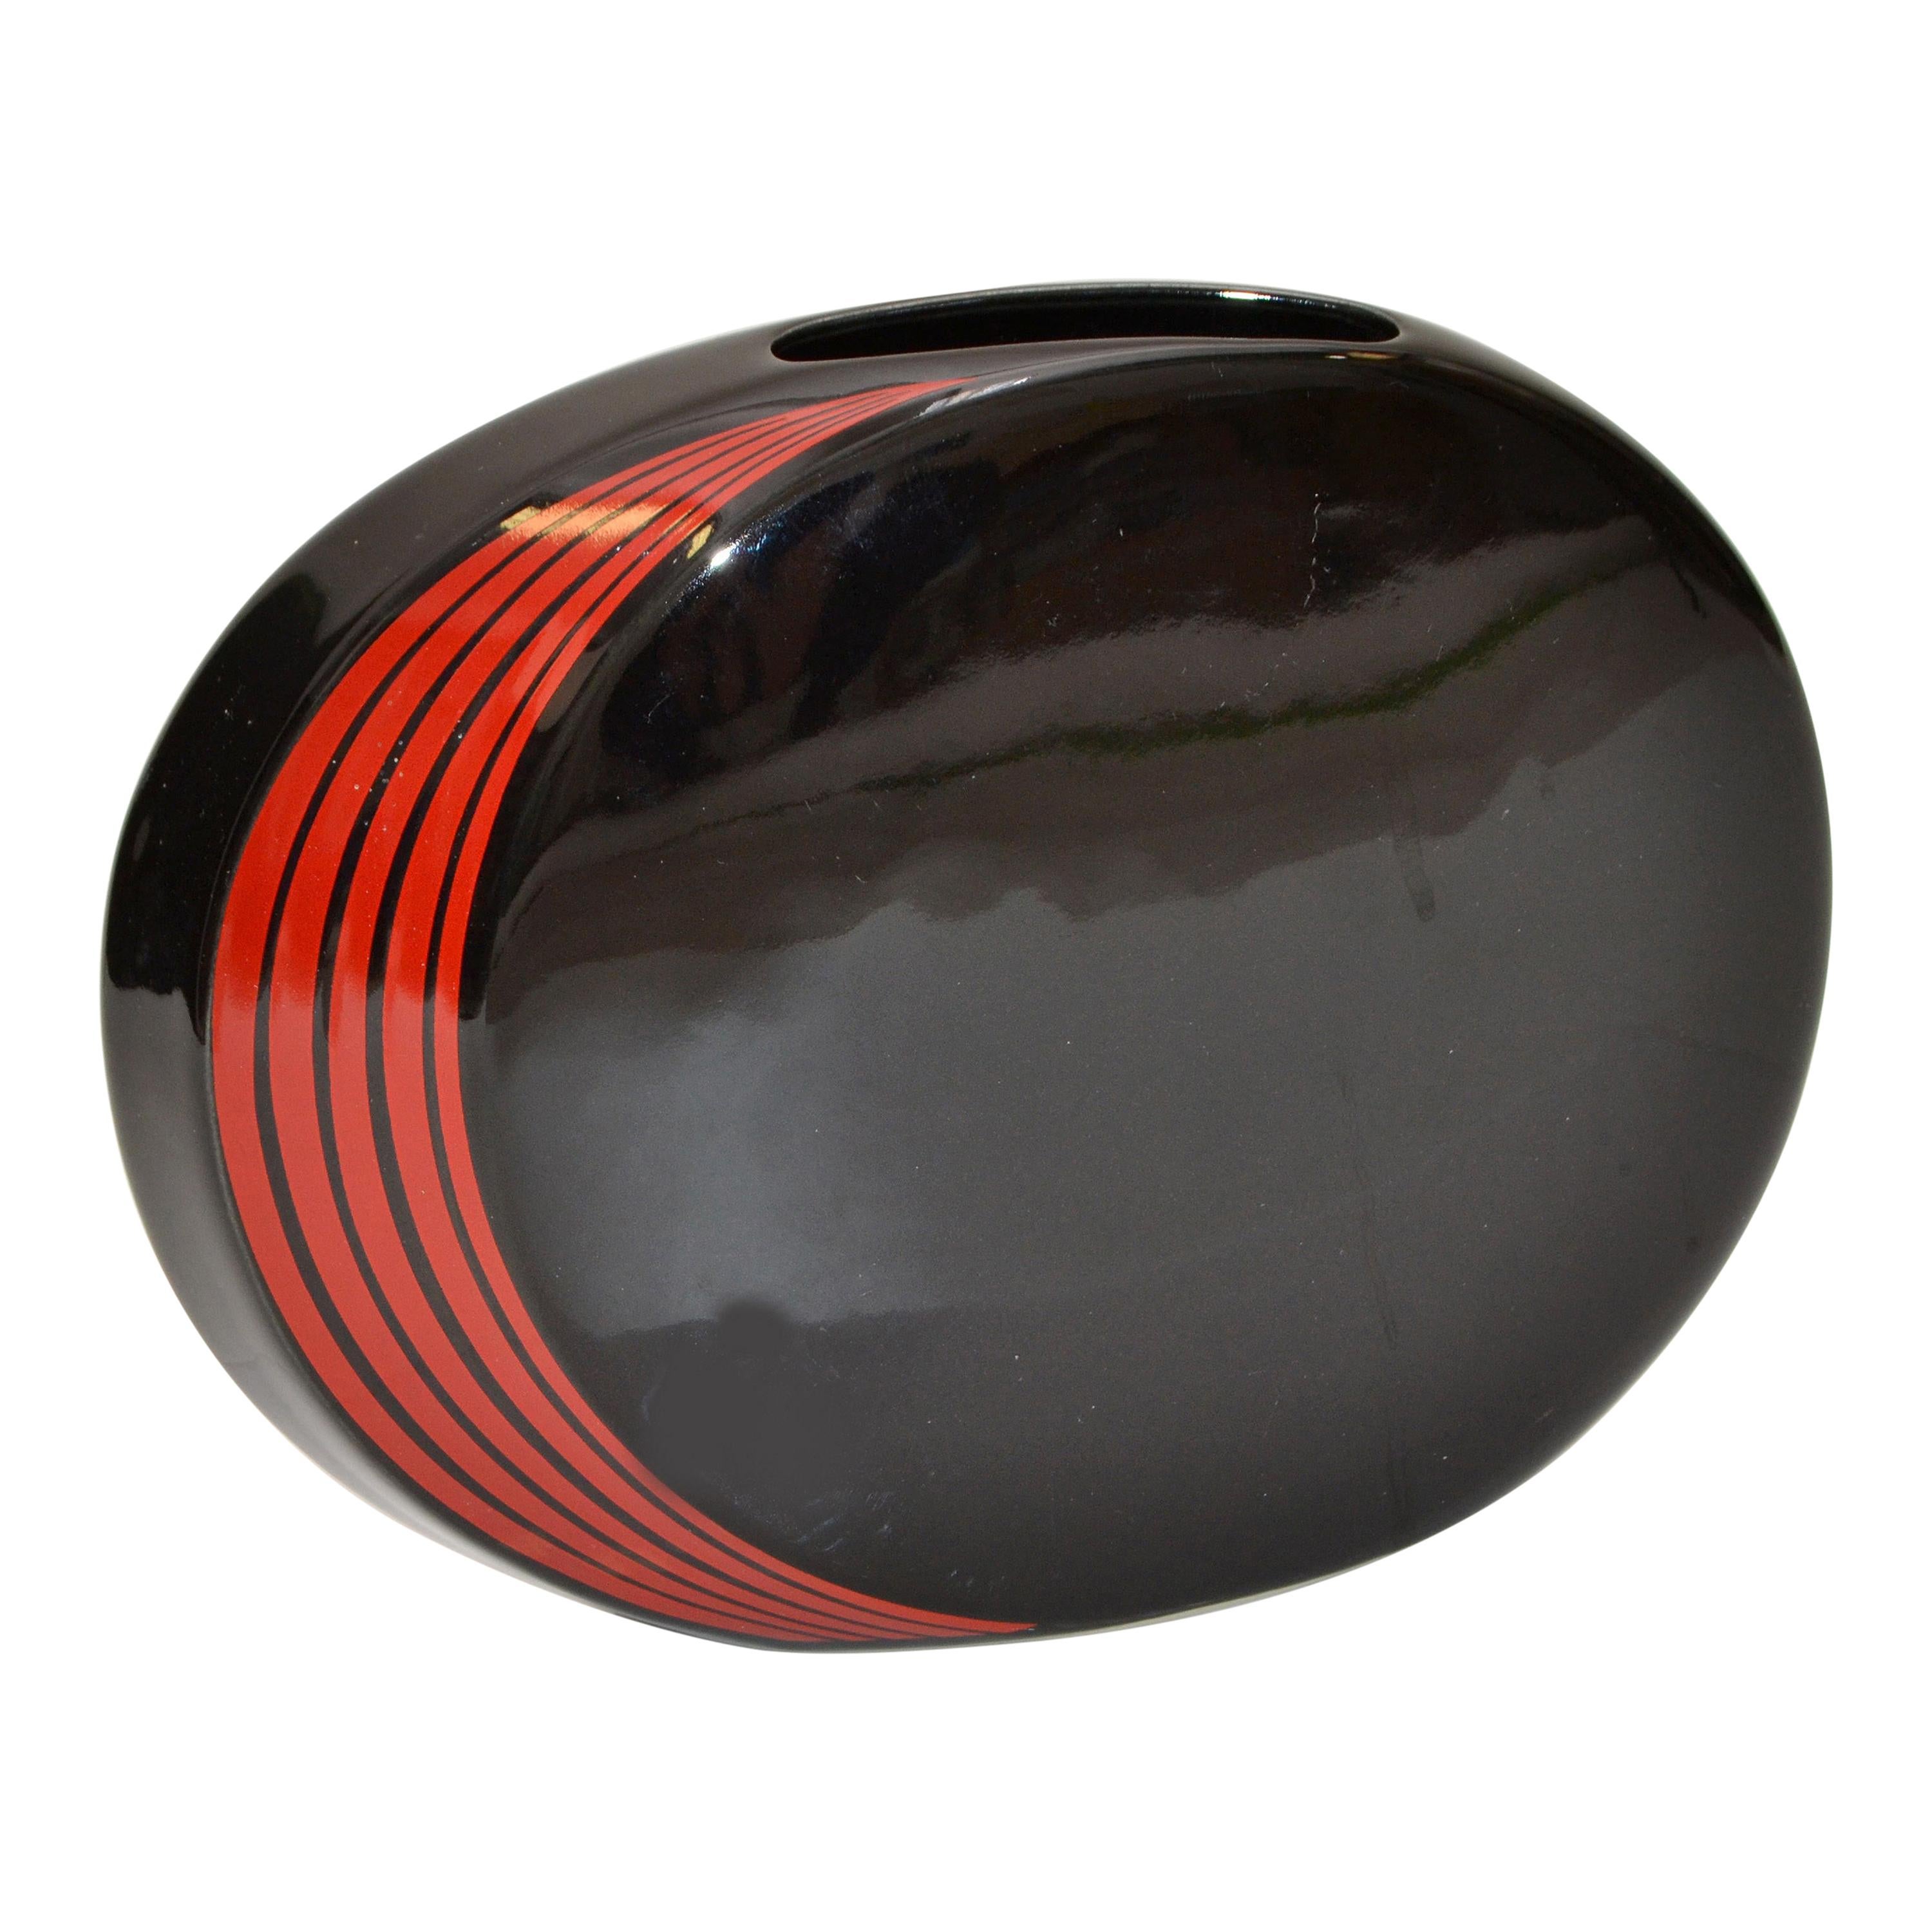 Op Art Japan Ceramic Black and Red Round Flat Vase Mid-Century Modern For Sale